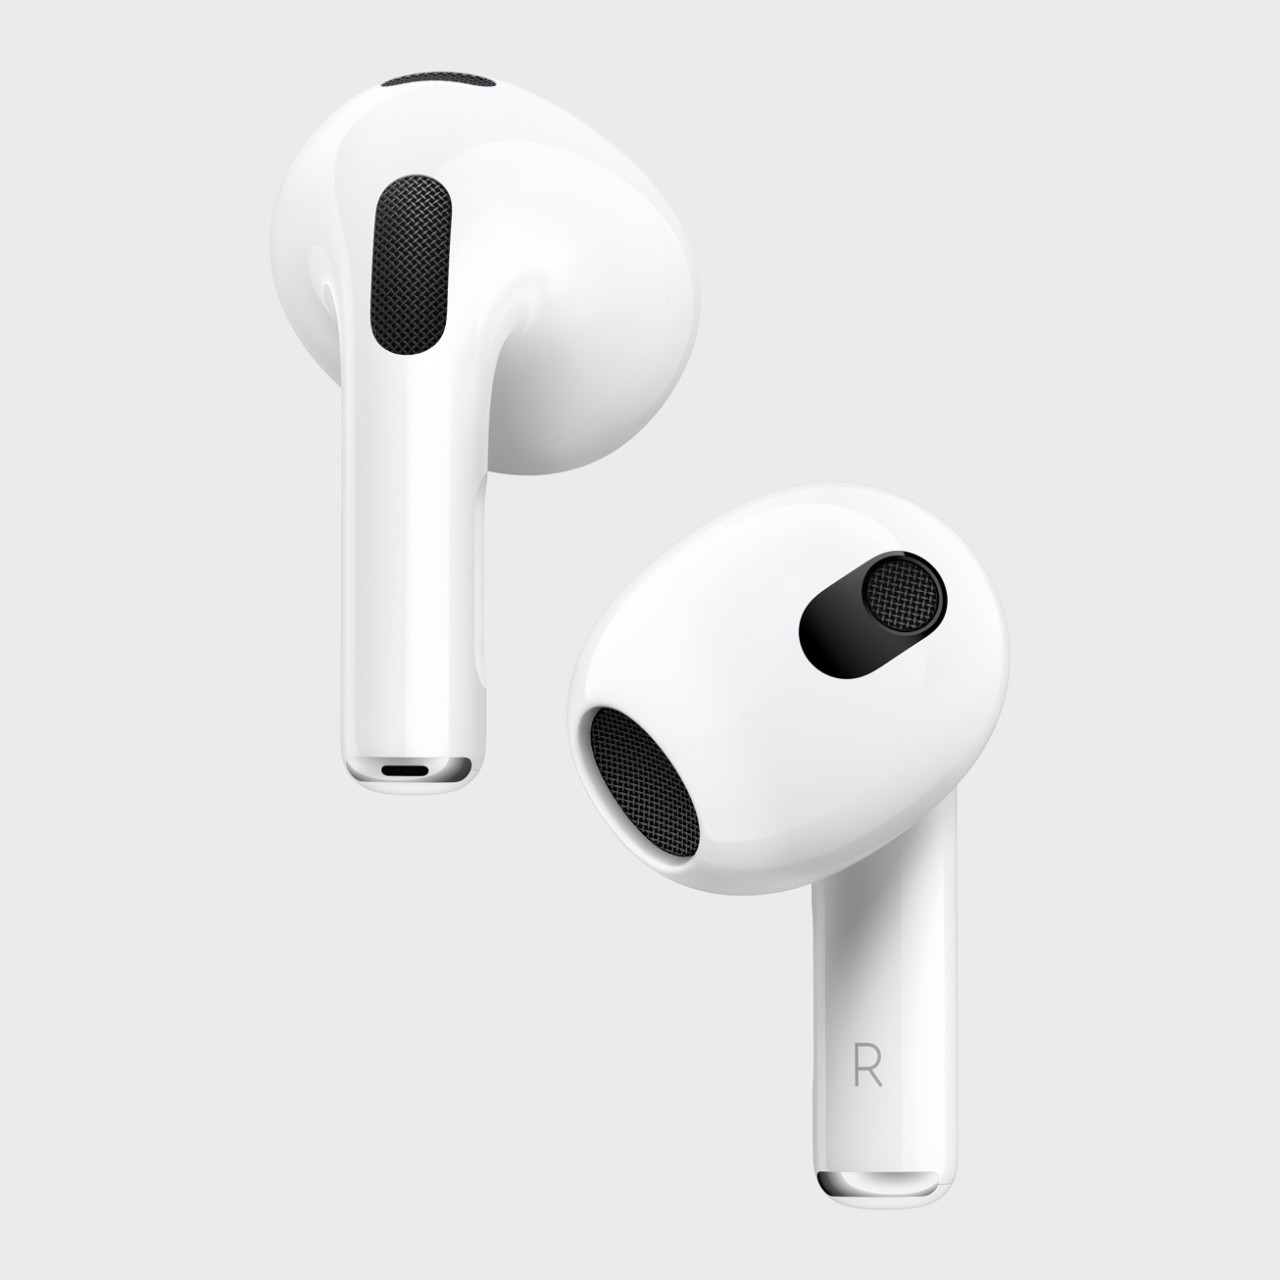 The new AirPods come in a new and more compact design, without diminishing its audio quality. – Pic courtesy of Apple